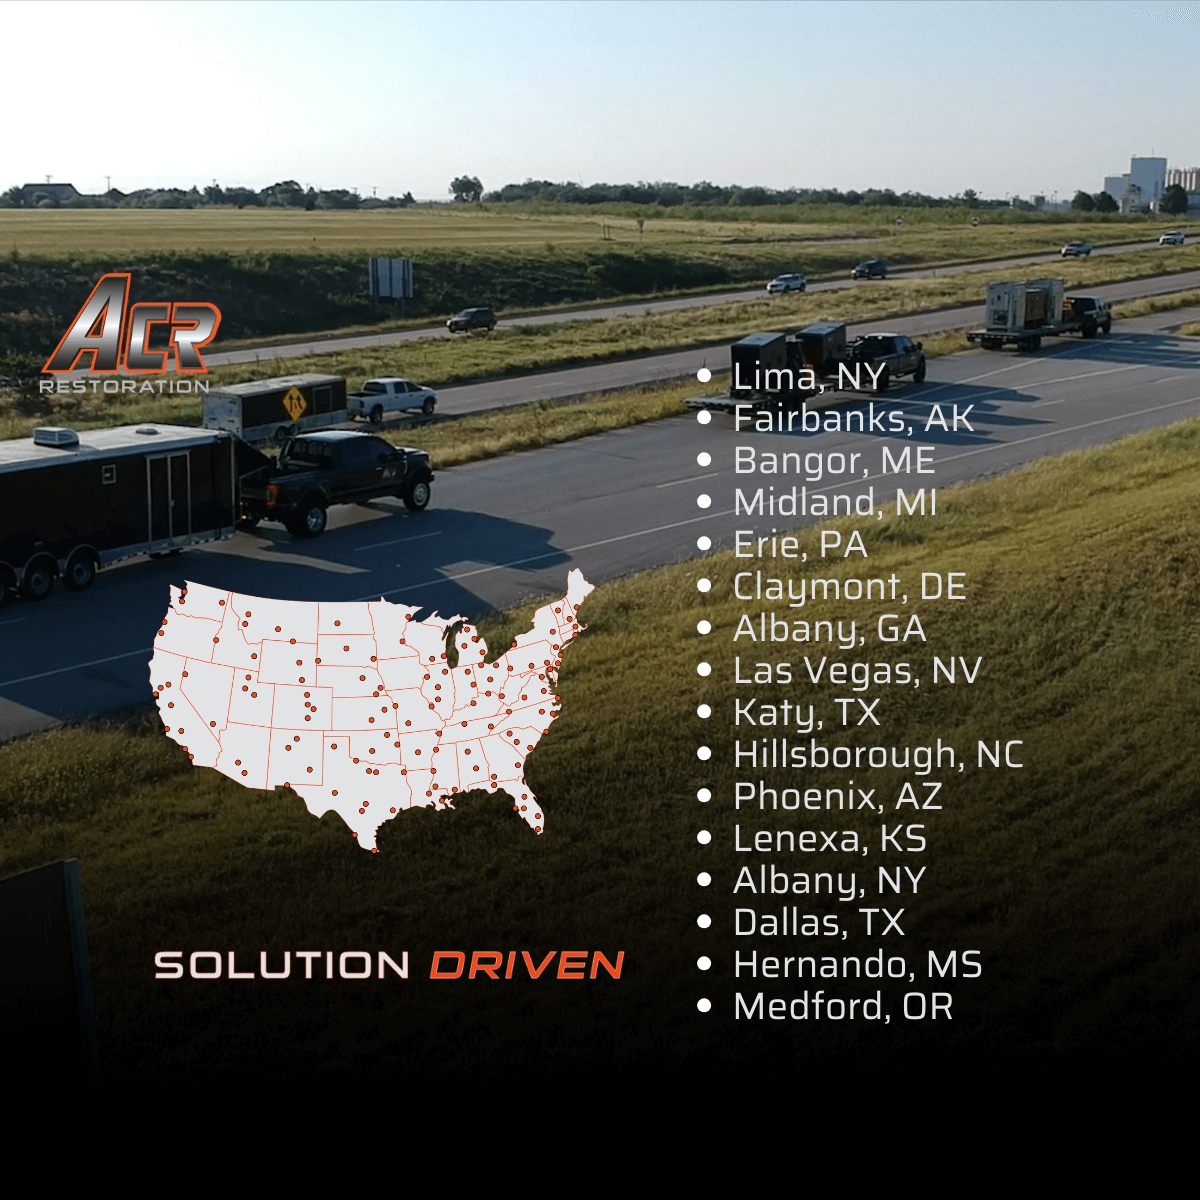 ACR Companies serves over 20 states